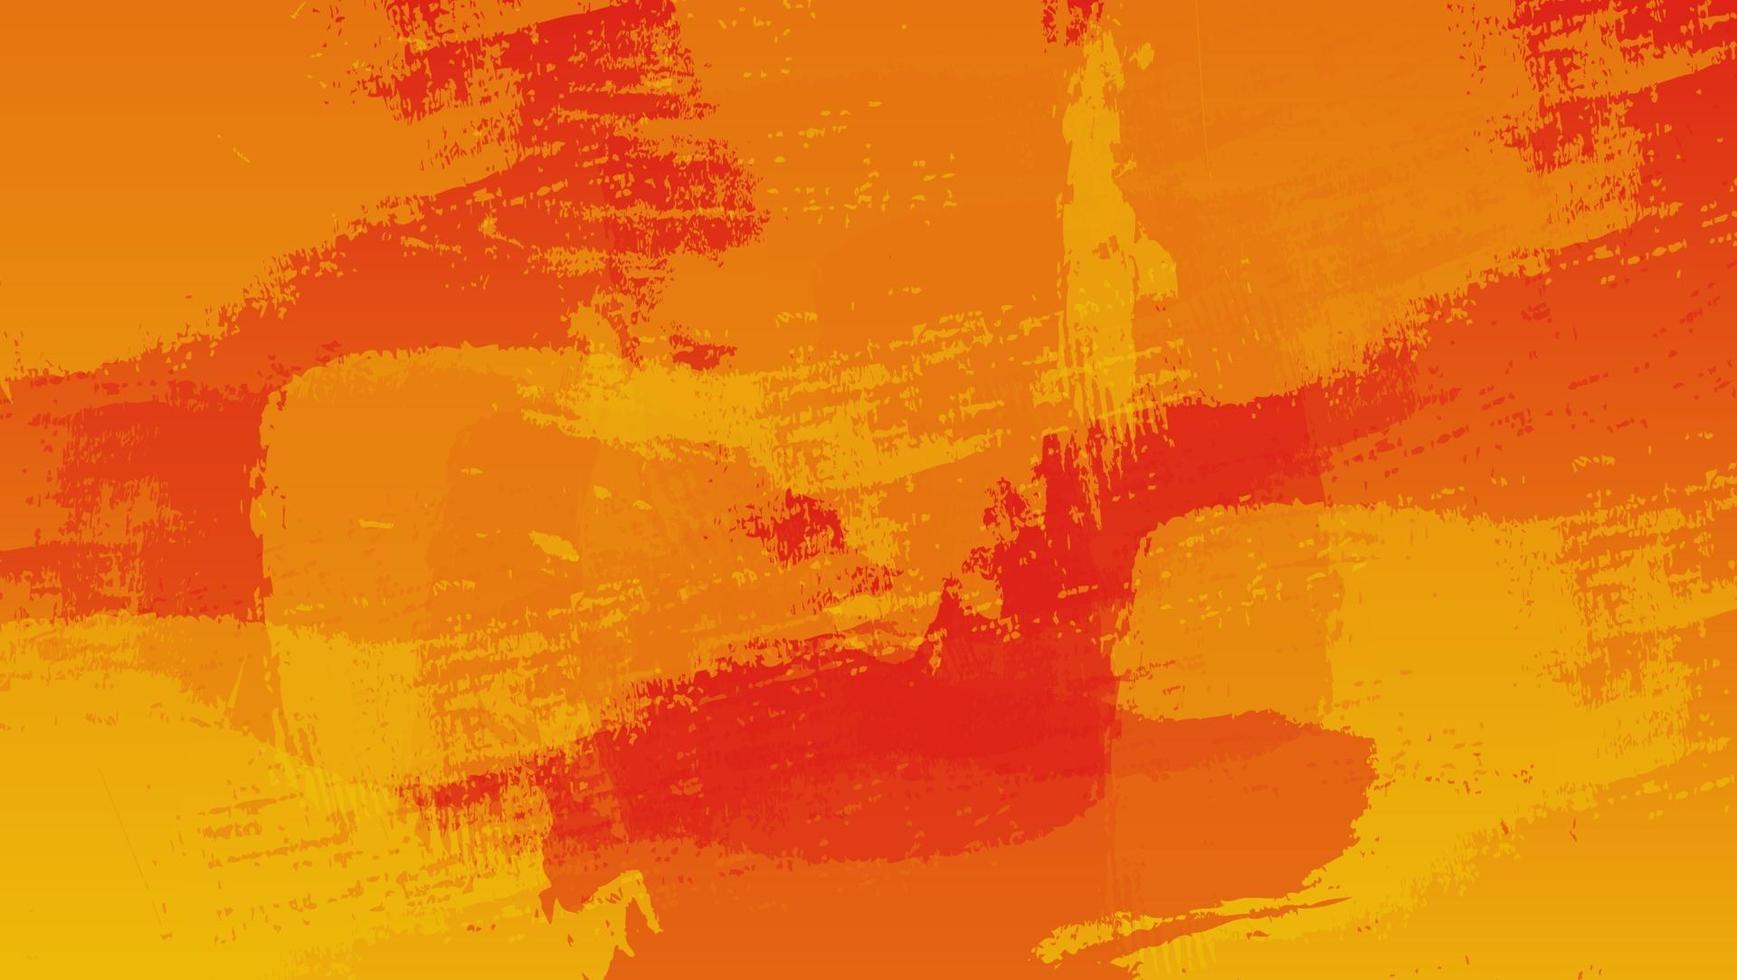 Abstract Vibrant Orange Grunge Texture Background vector